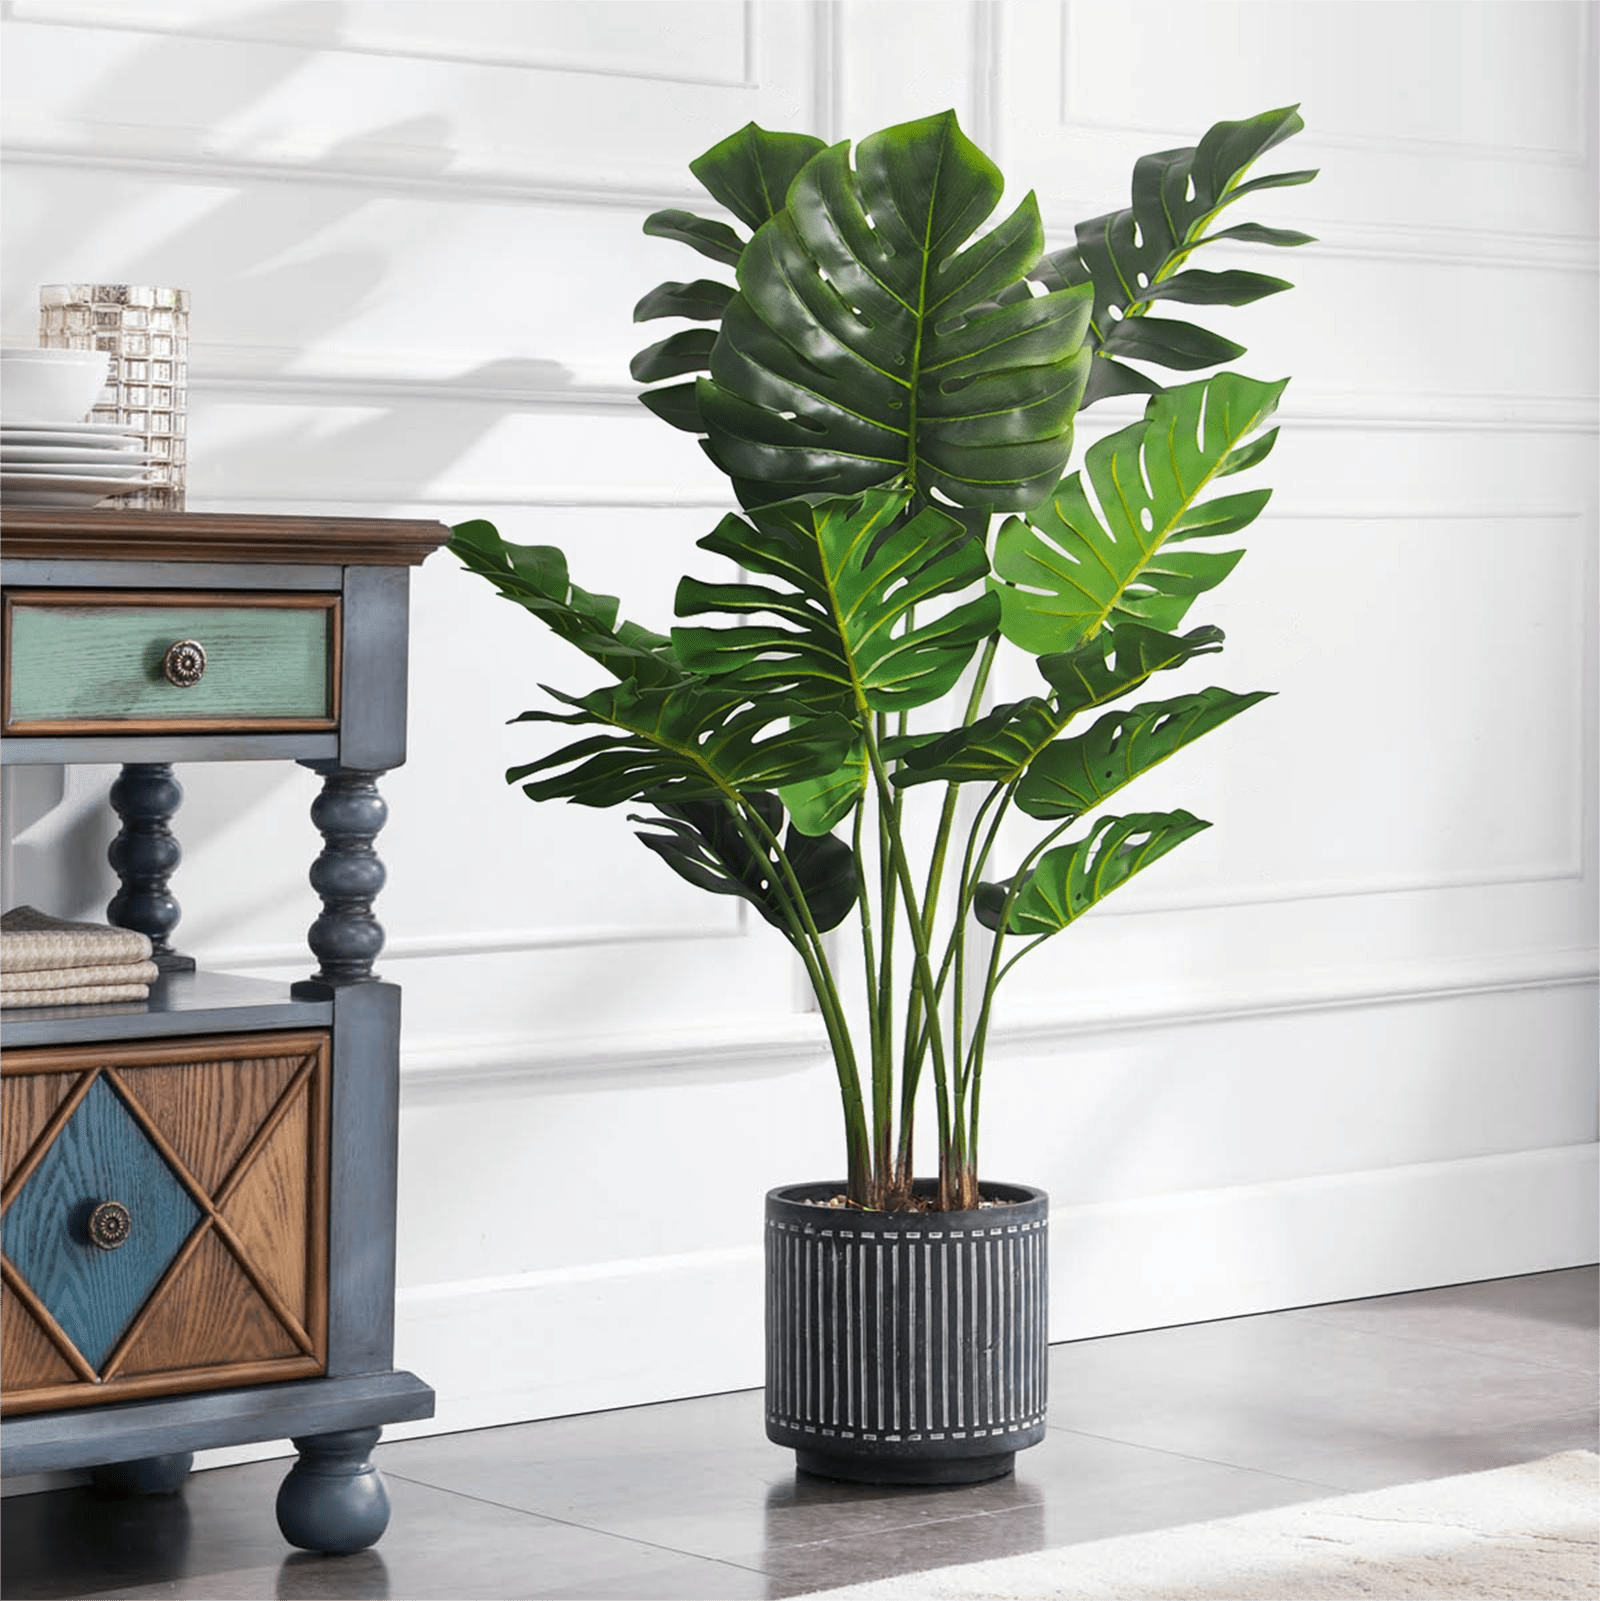 40" Artificial Monstera Deliciosa Tree in Pot Tree Fake Plant Floor Faux Silk Swiss Cheese Plant Fake Potted Aritificial Tree for Home Decor Living Room Office Indoor Outdoor Walmart.com